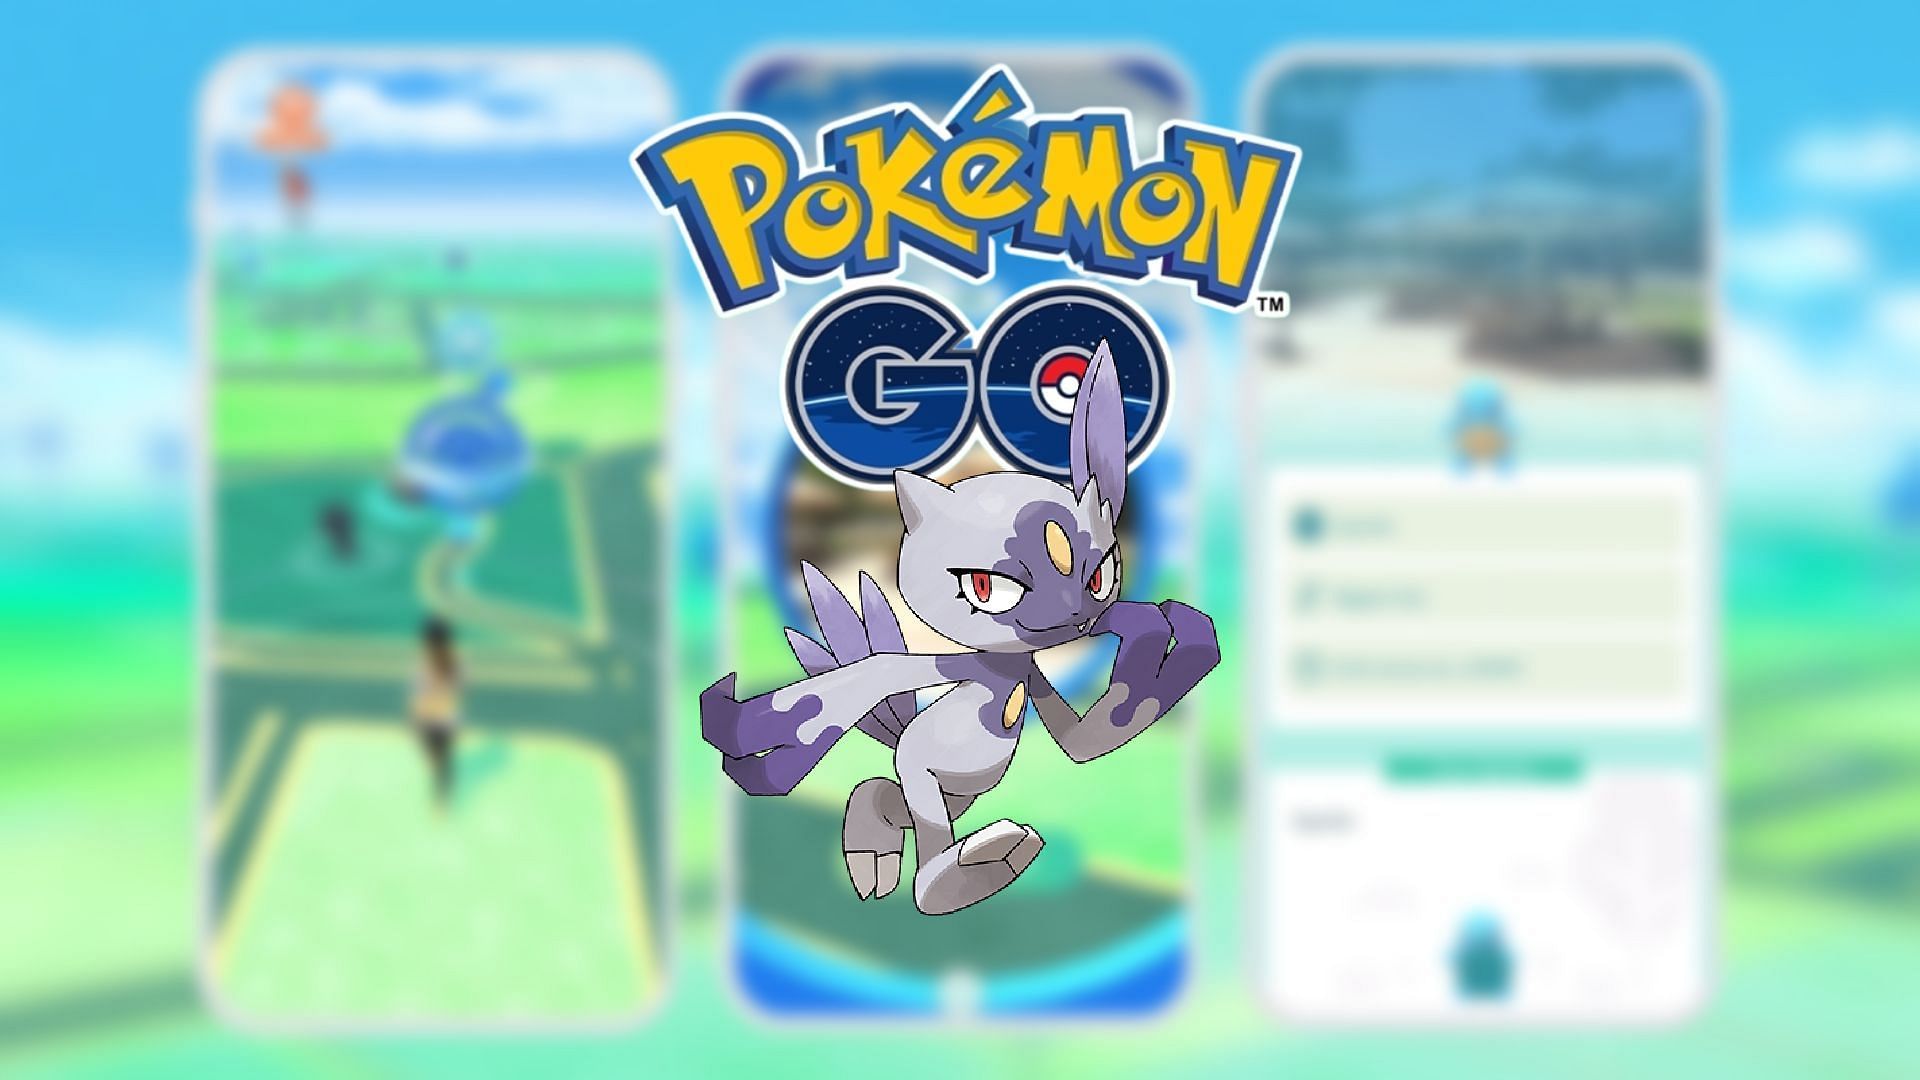 Pokémon GO December 2023 Events: Upcoming & Expected